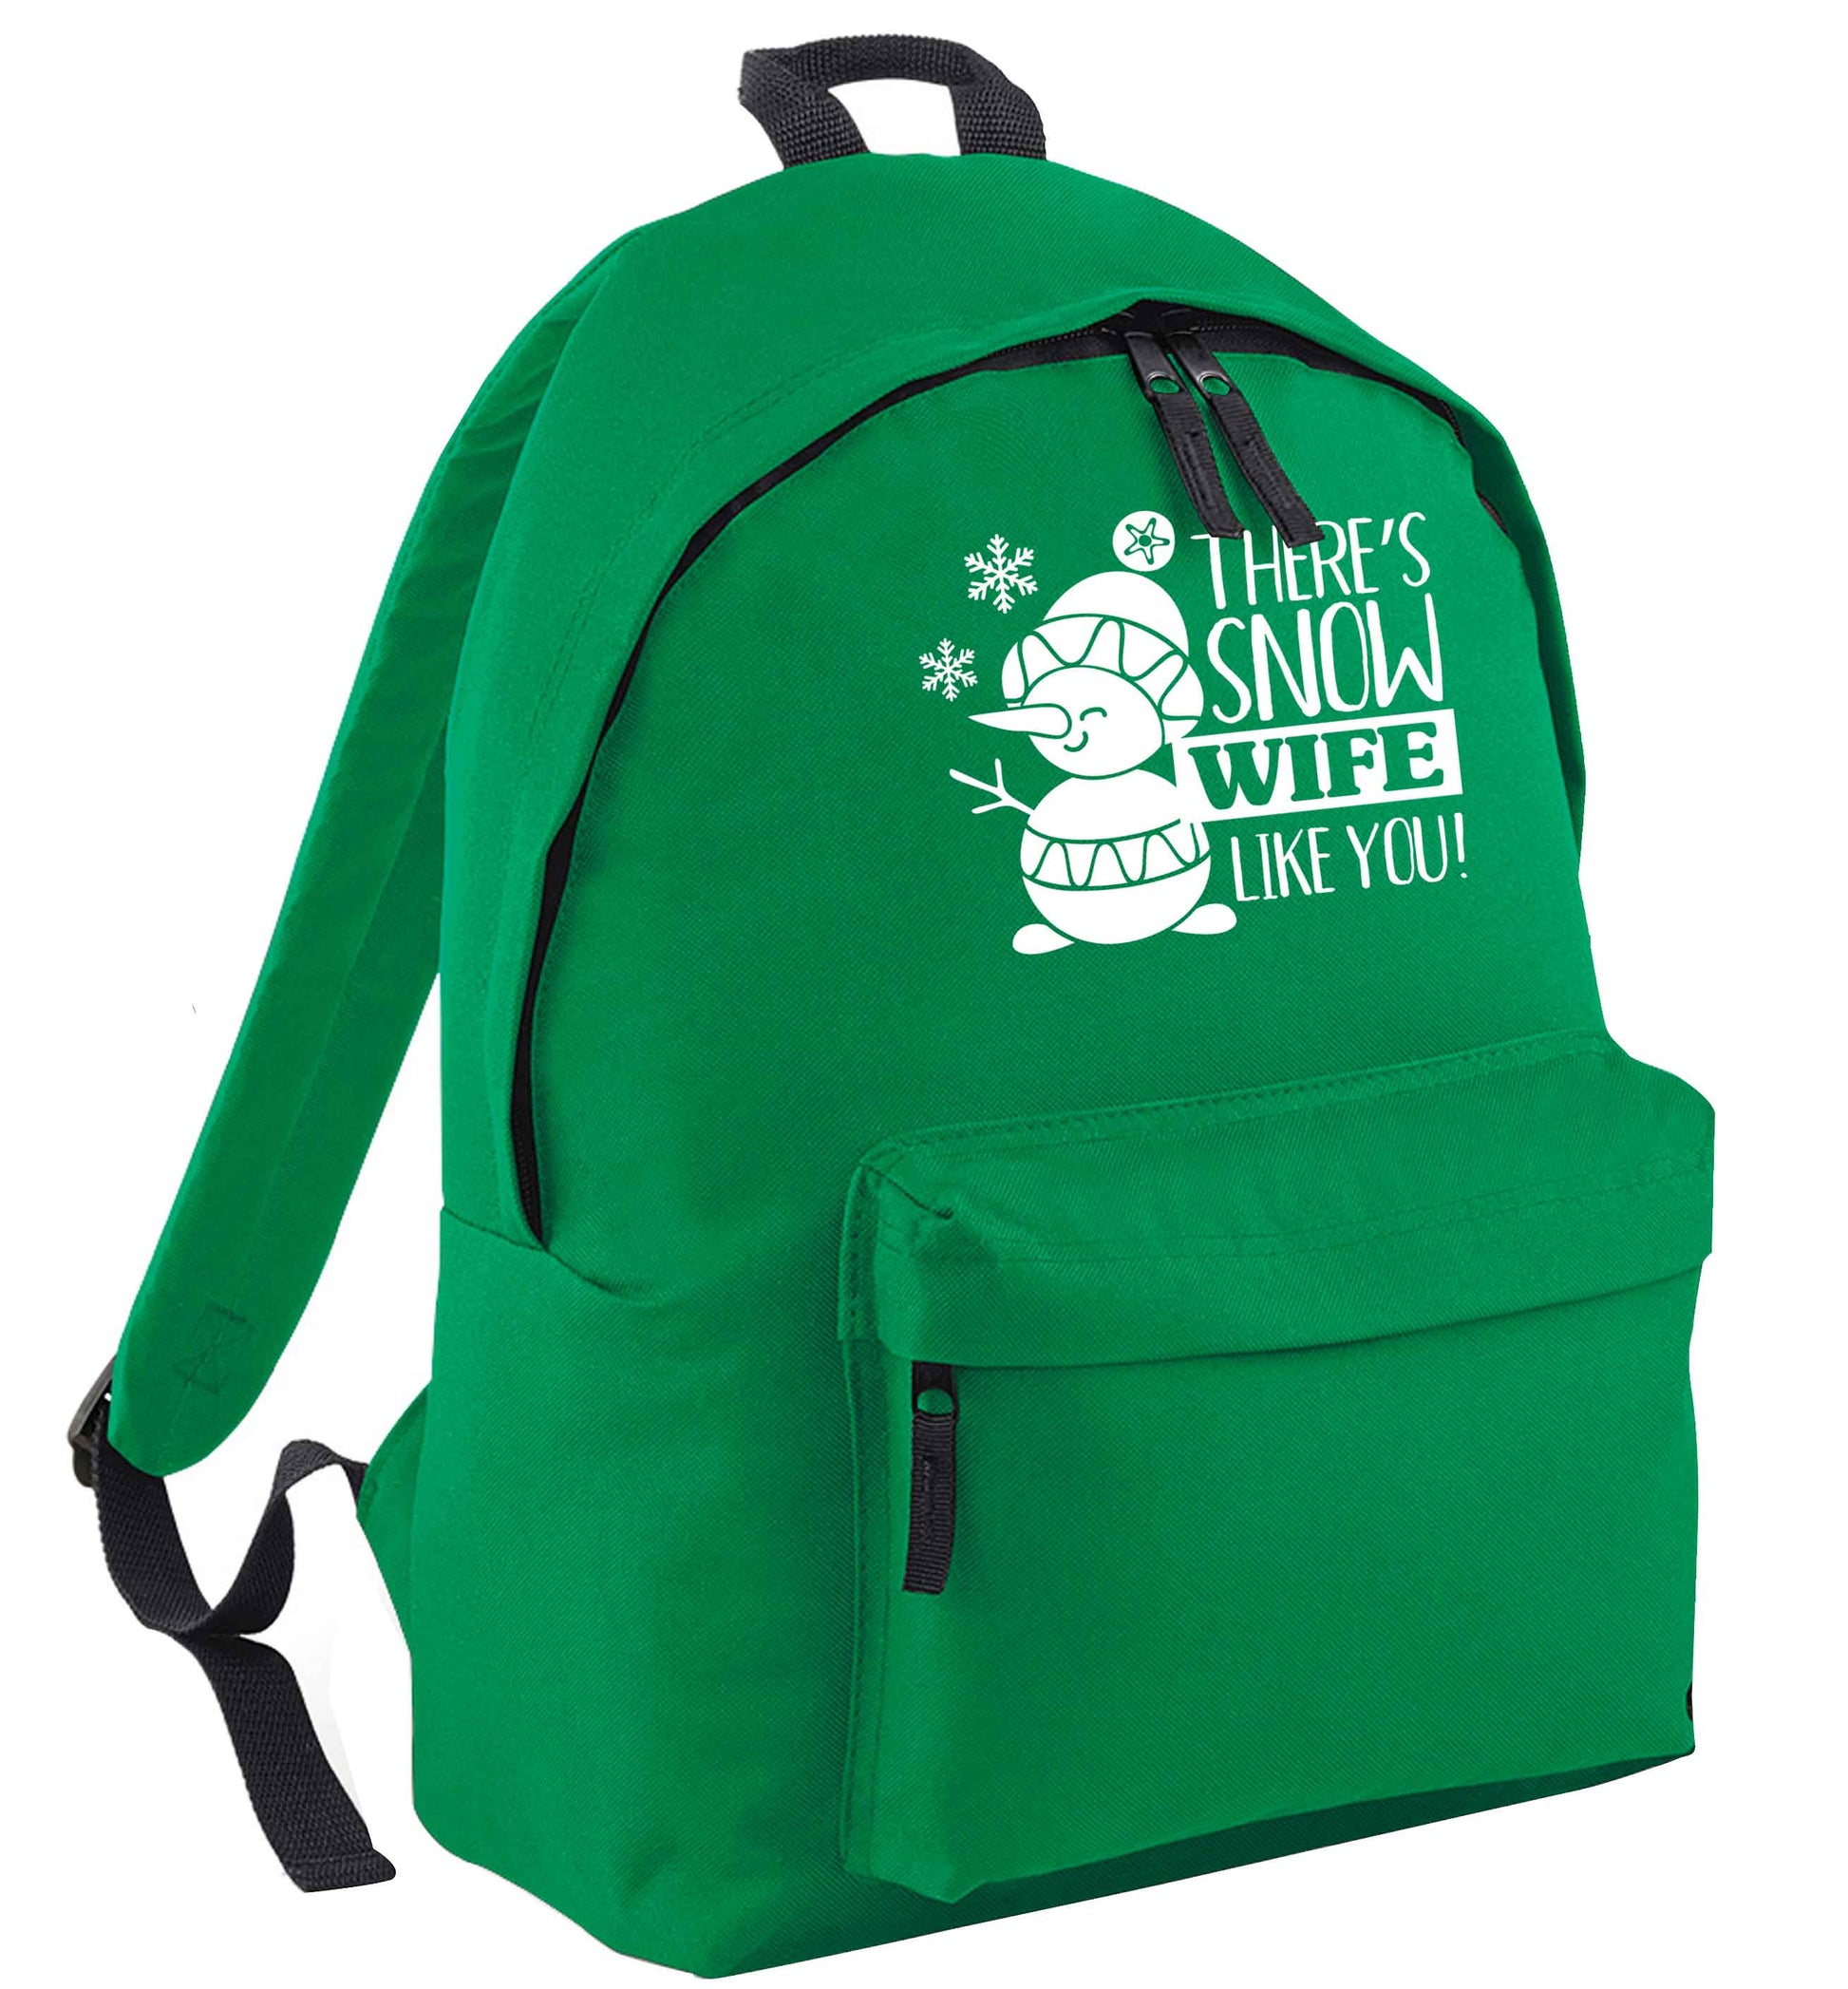 There's snow wife like you green adults backpack